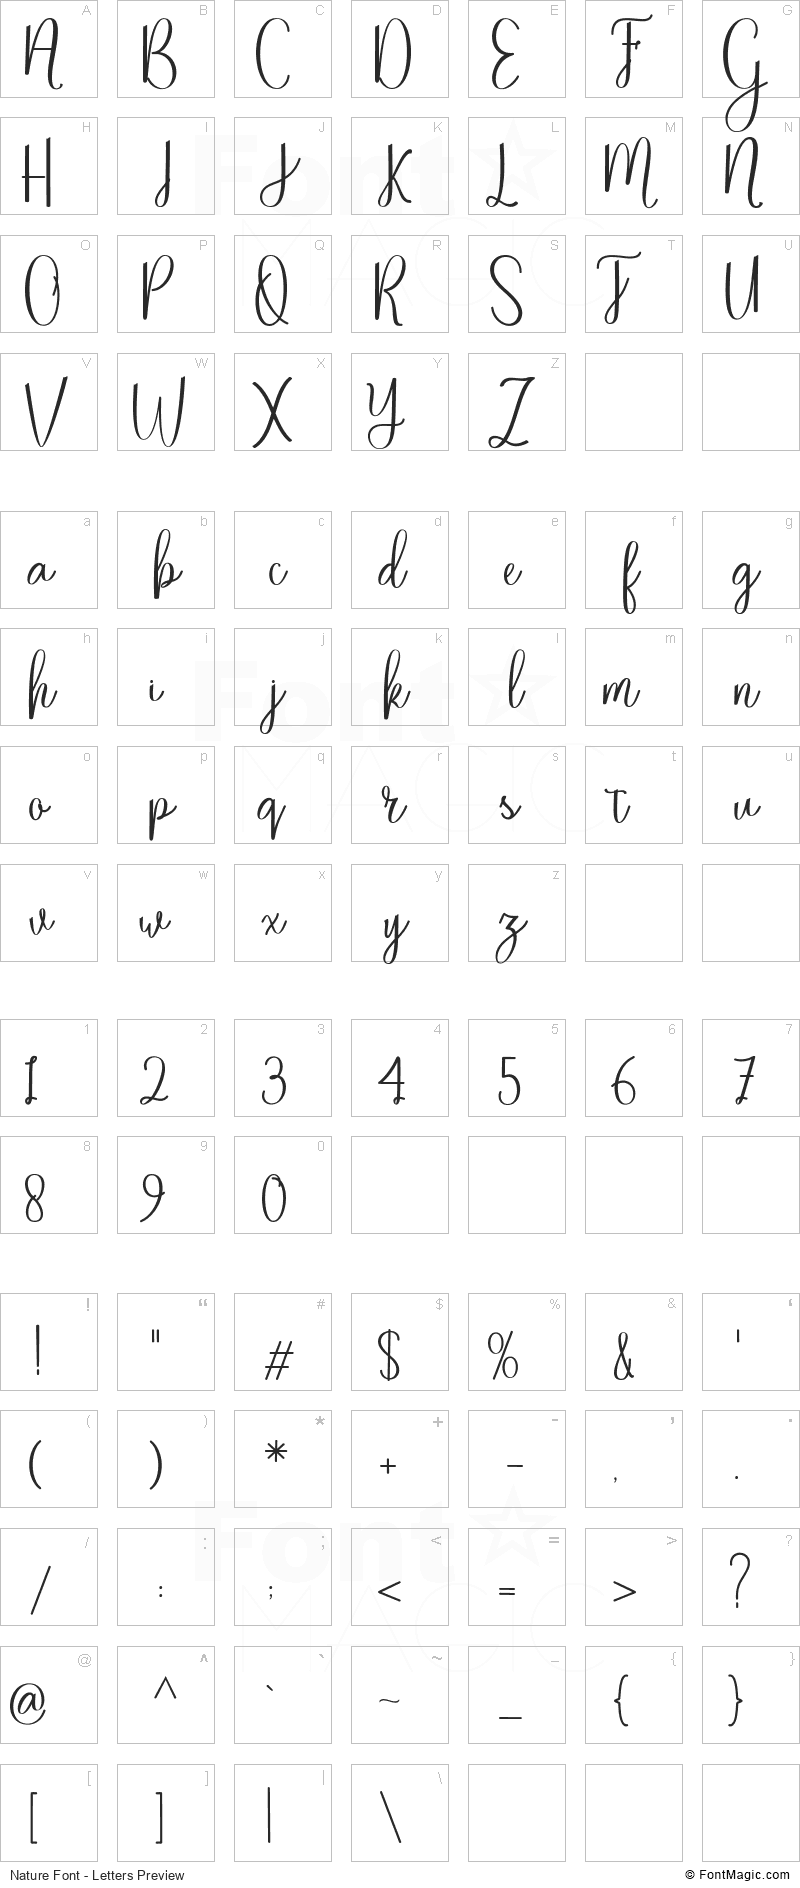 Nature Font - All Latters Preview Chart